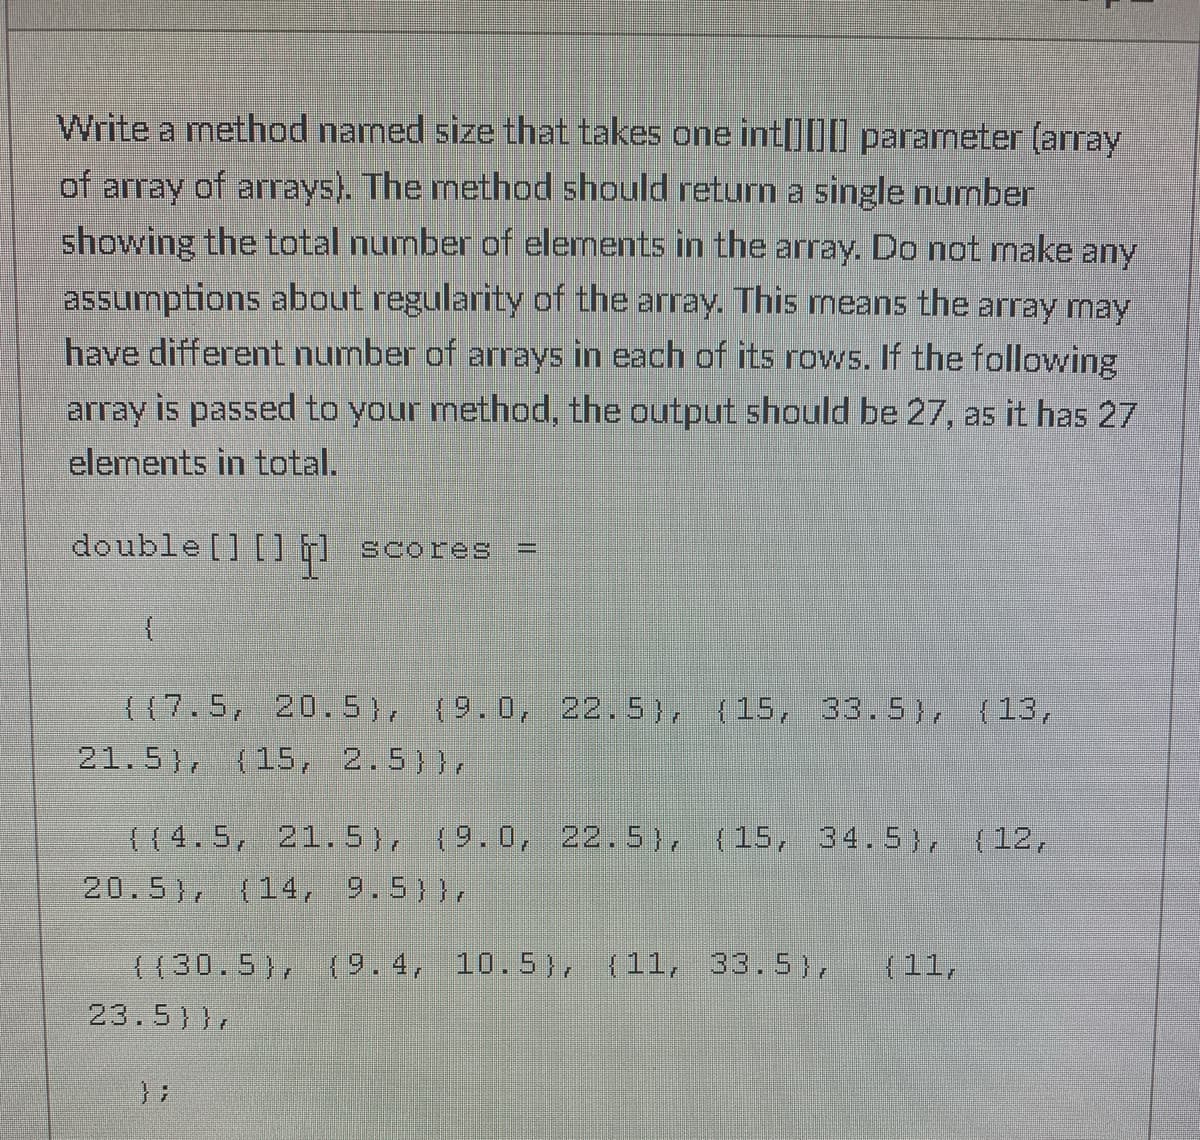 Write a method named size that takes one int[]00 parameter (array
of array of arrays). The method should return a single number
showing the total number of elements in the array. Do not make any
assumptions about regularity of the array. This means the array may
have different number of arrays in each of its rows. If the following
array is passed to your method, the output should be 27, as it has 27
elements in total.
double [] [] F1 scores
{{7.5, 20.5), (9.0, 22.5), (15, 33.5), {13,
21.5), (15, 2.5)},
((4.5, 21. 5), (9.0, 22.5), (15, 34.5), (12,
20.5), (14, 9.5)},
((30.5), ({ 9.4, 10.5), (11, 33. 5),
(11,
23.5)},
